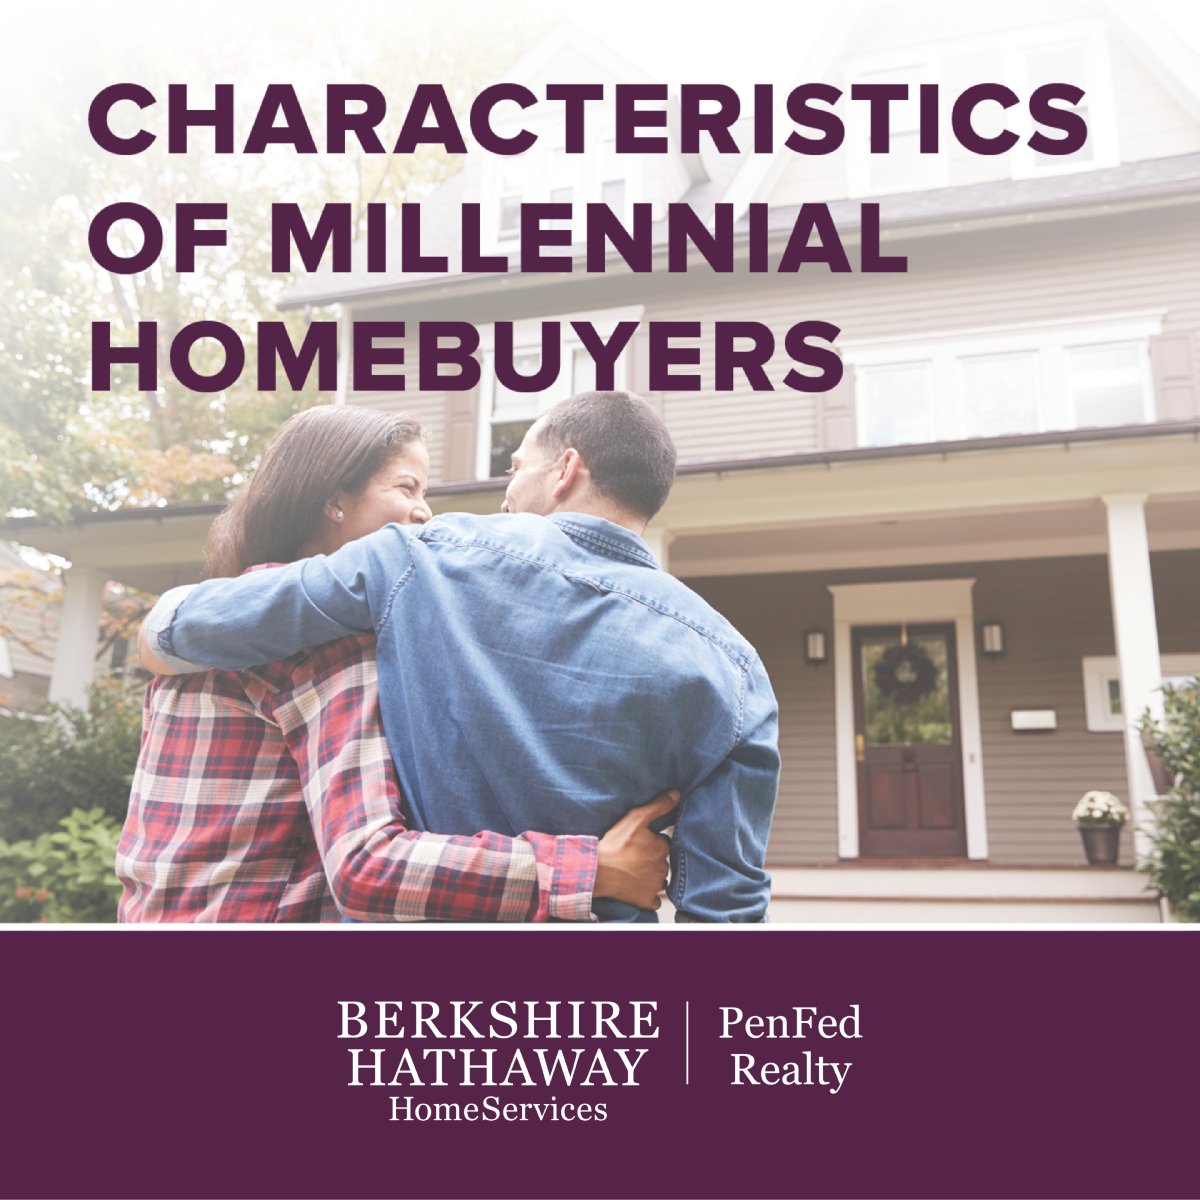 Millennials now represent the largest group of home buyers. Here’s what sellers can expect.  bhhs.com/about/newsroom…
🏡 
#HomeBuyerTrends